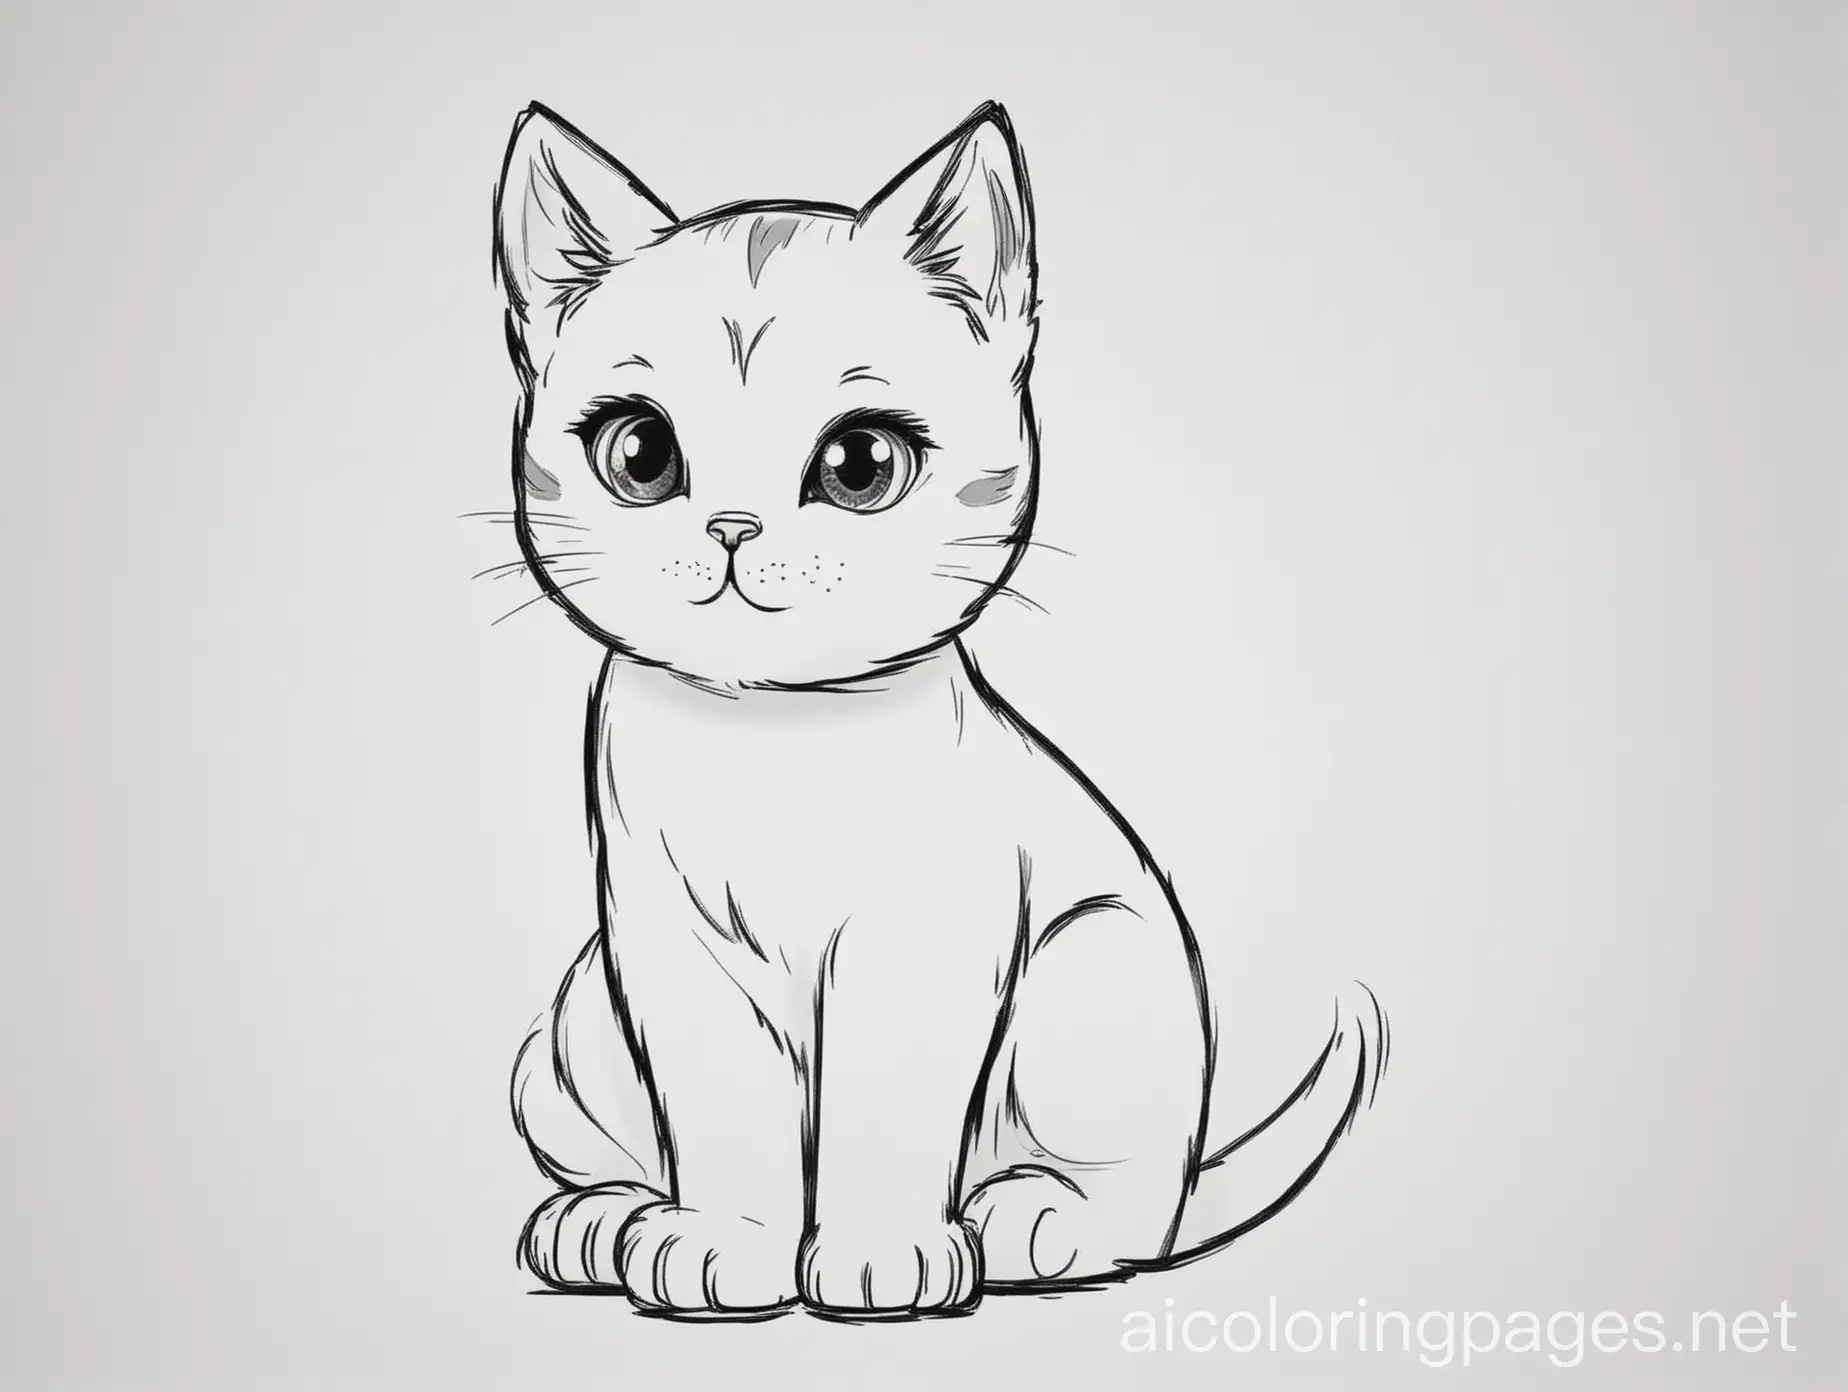 kitty cat,n Coloring Page, black and white, line art, white background, Simplicity, Ample White Space. The background of the coloring page is plain white to make it easy for young children to color within the lines. The outlines of all the subjects are easy to distinguish, making it simple for kids to color without too much difficulty